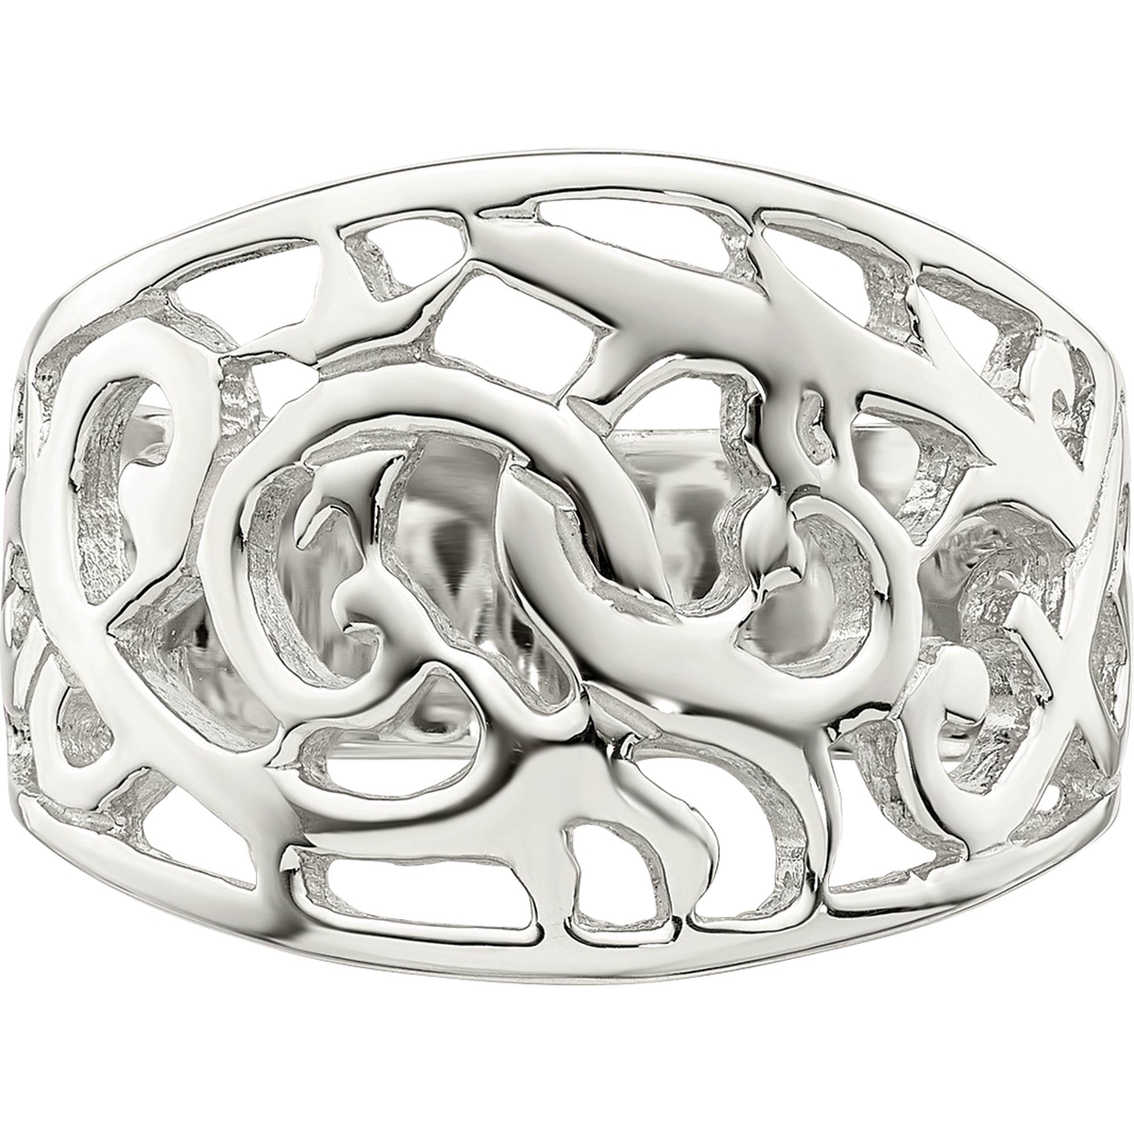 Sterling Silver Swirl Ring - Image 4 of 5